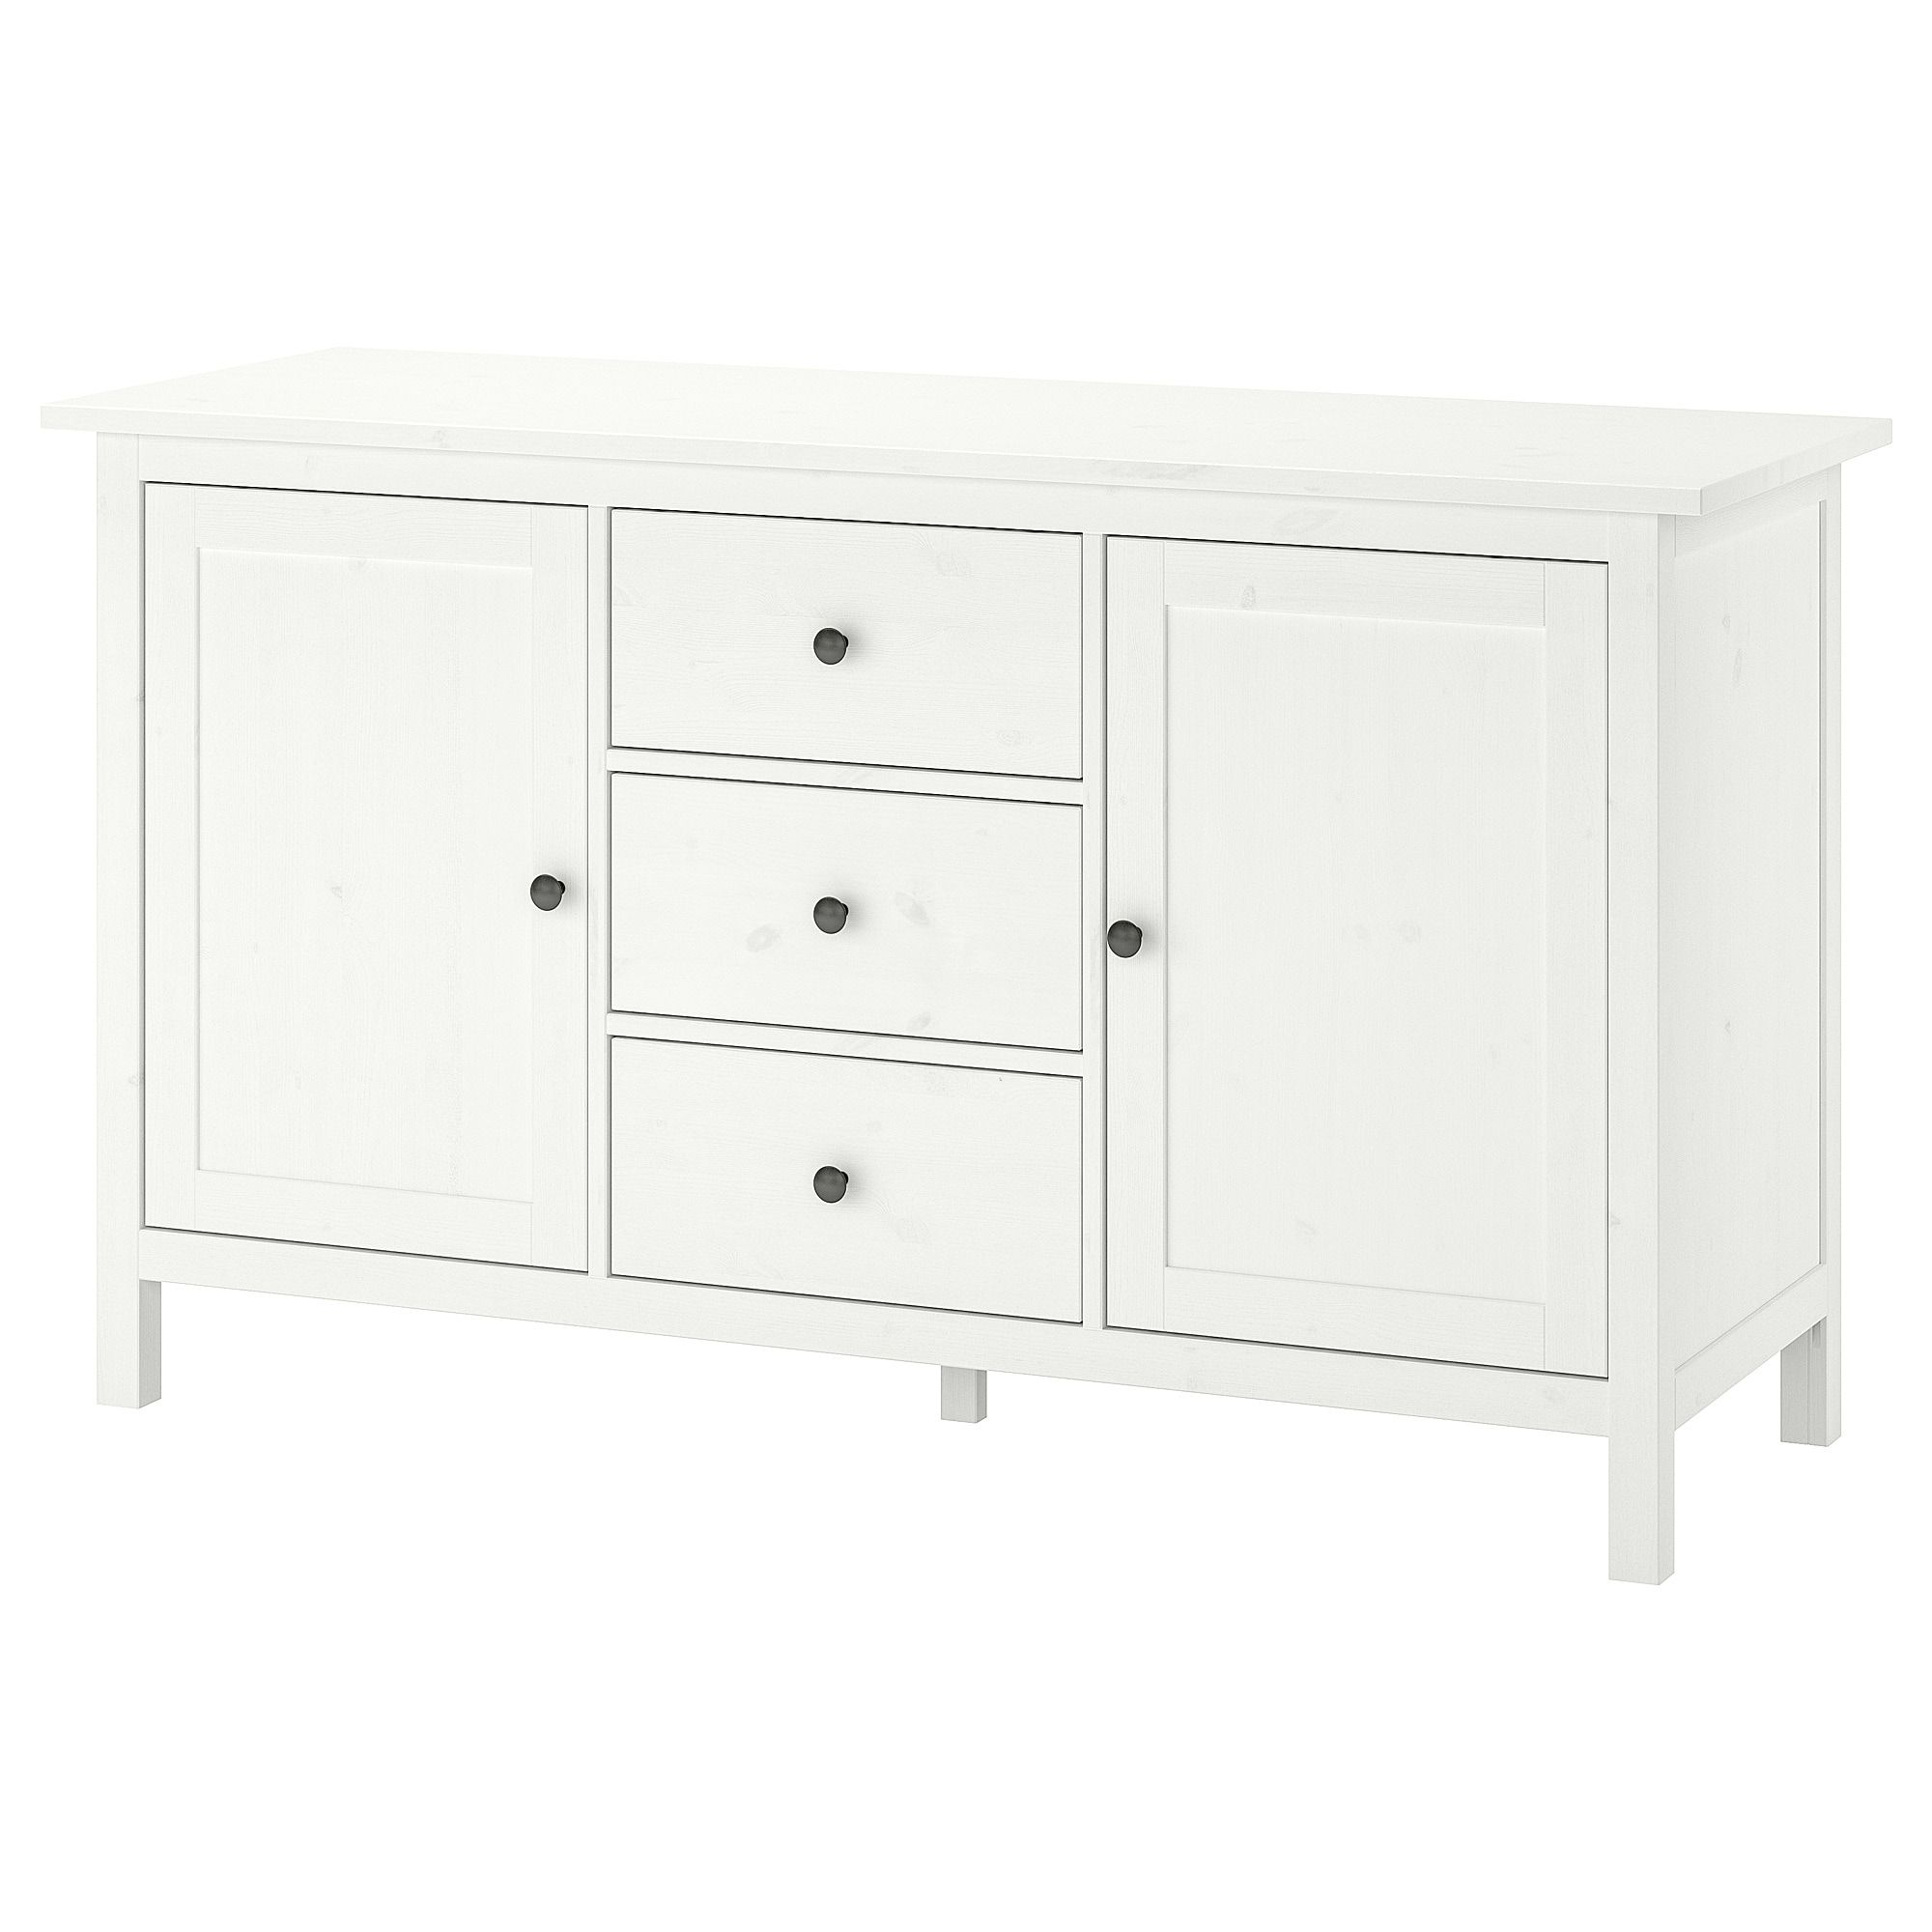 Sideboard Hemnes White Stain For Thite Sideboards (View 5 of 30)